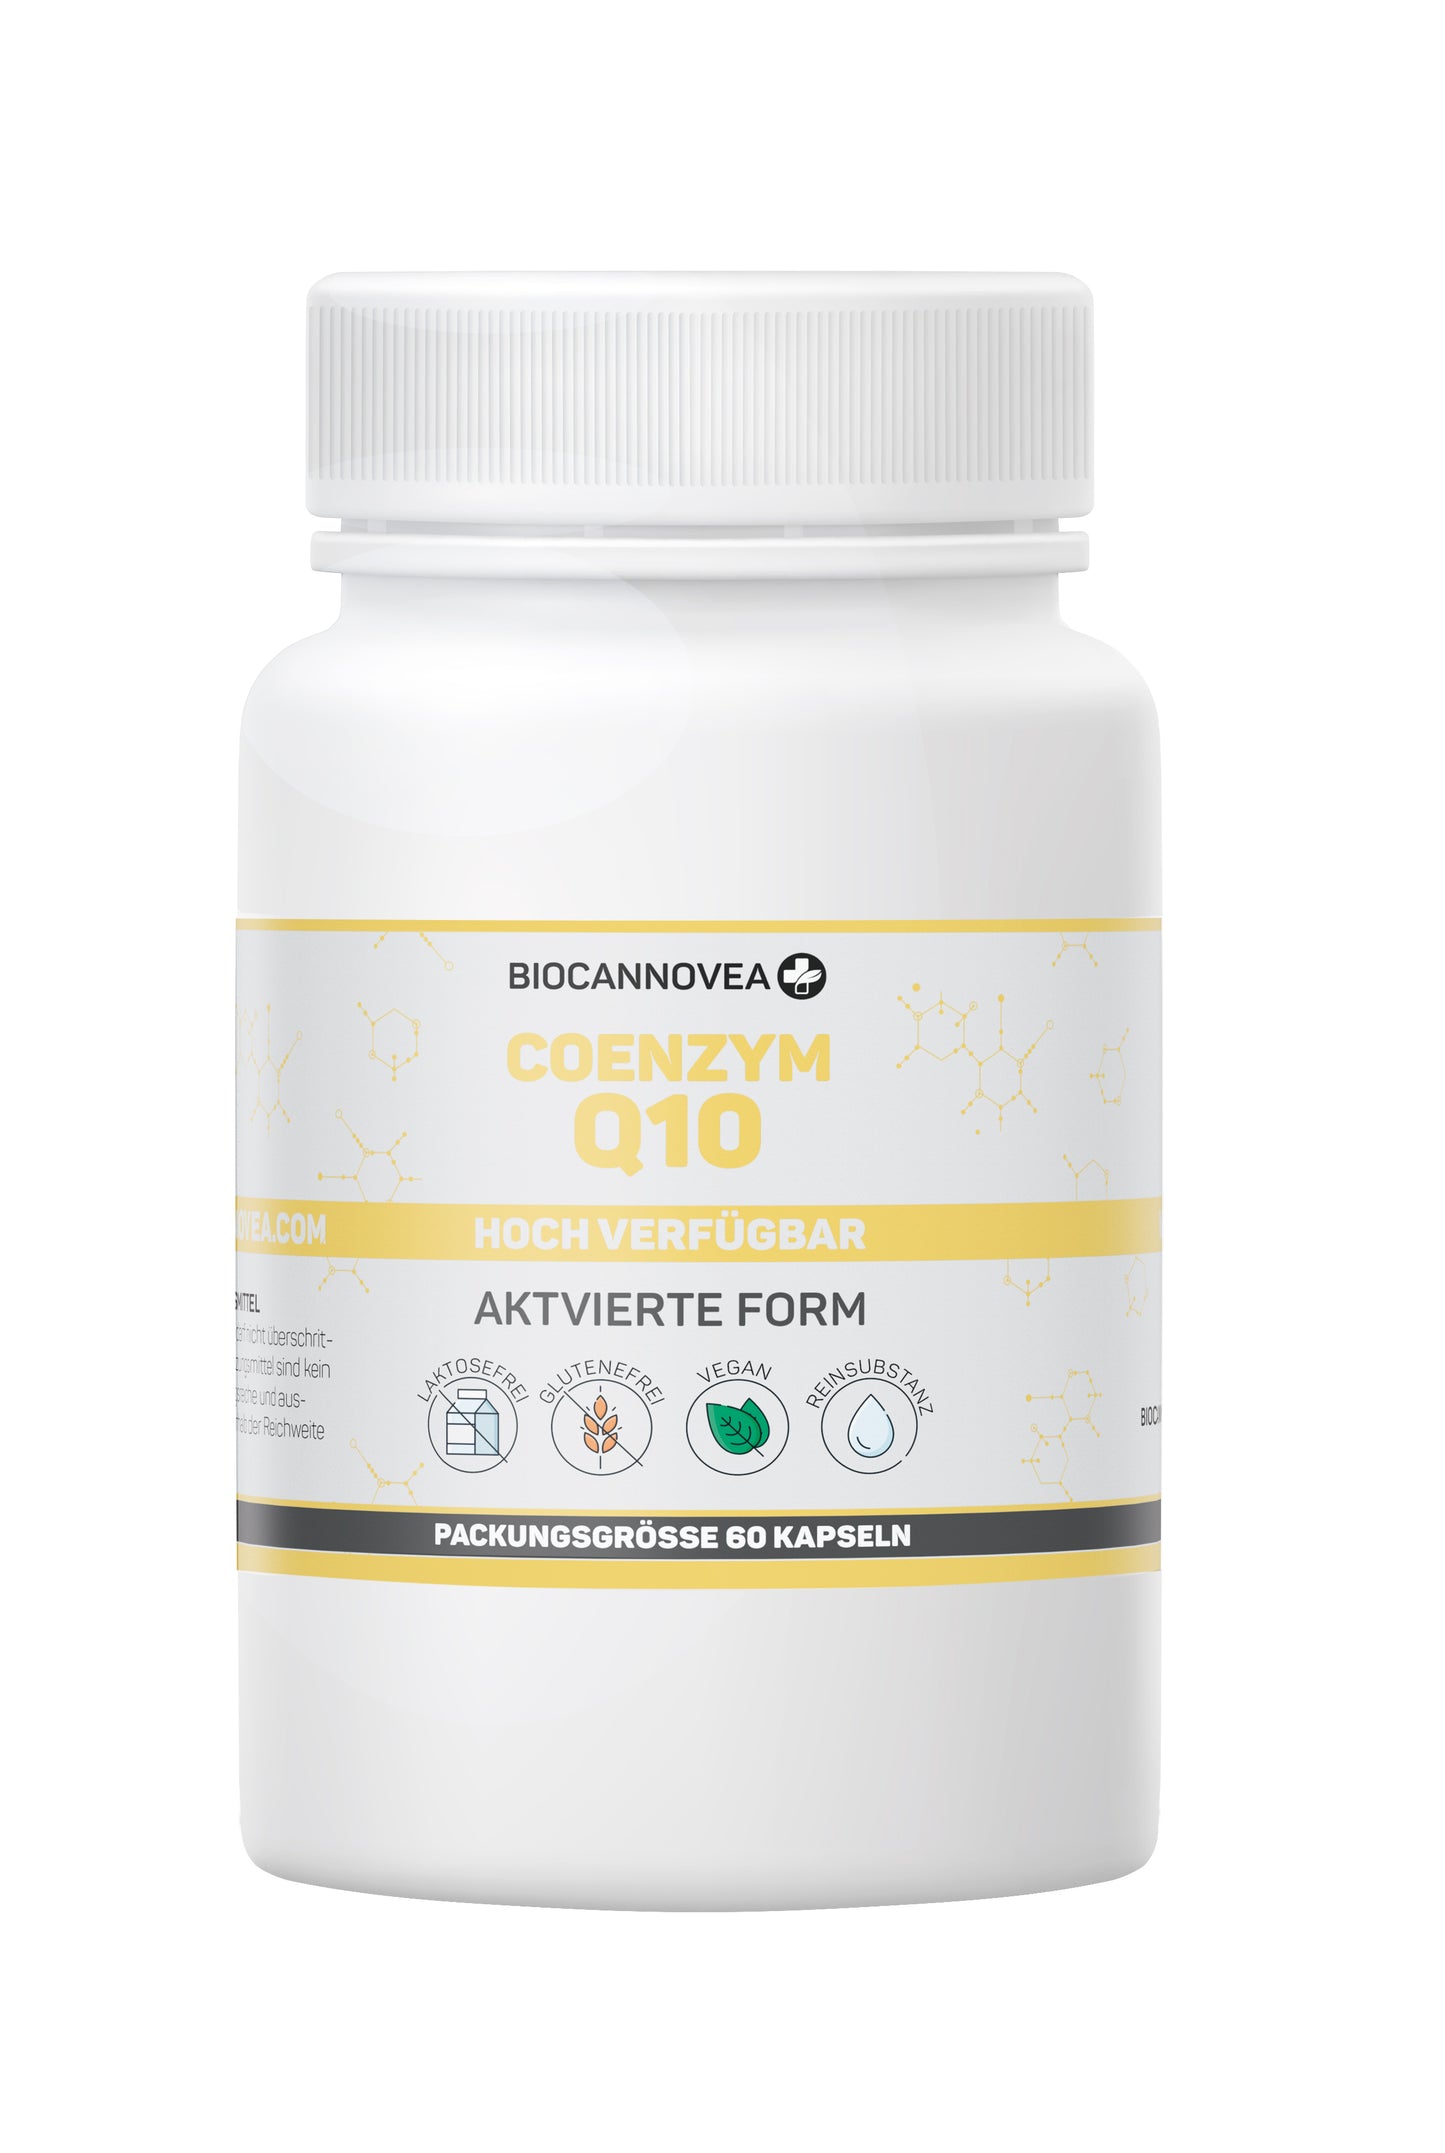 Coenzyme Q10 – activated form